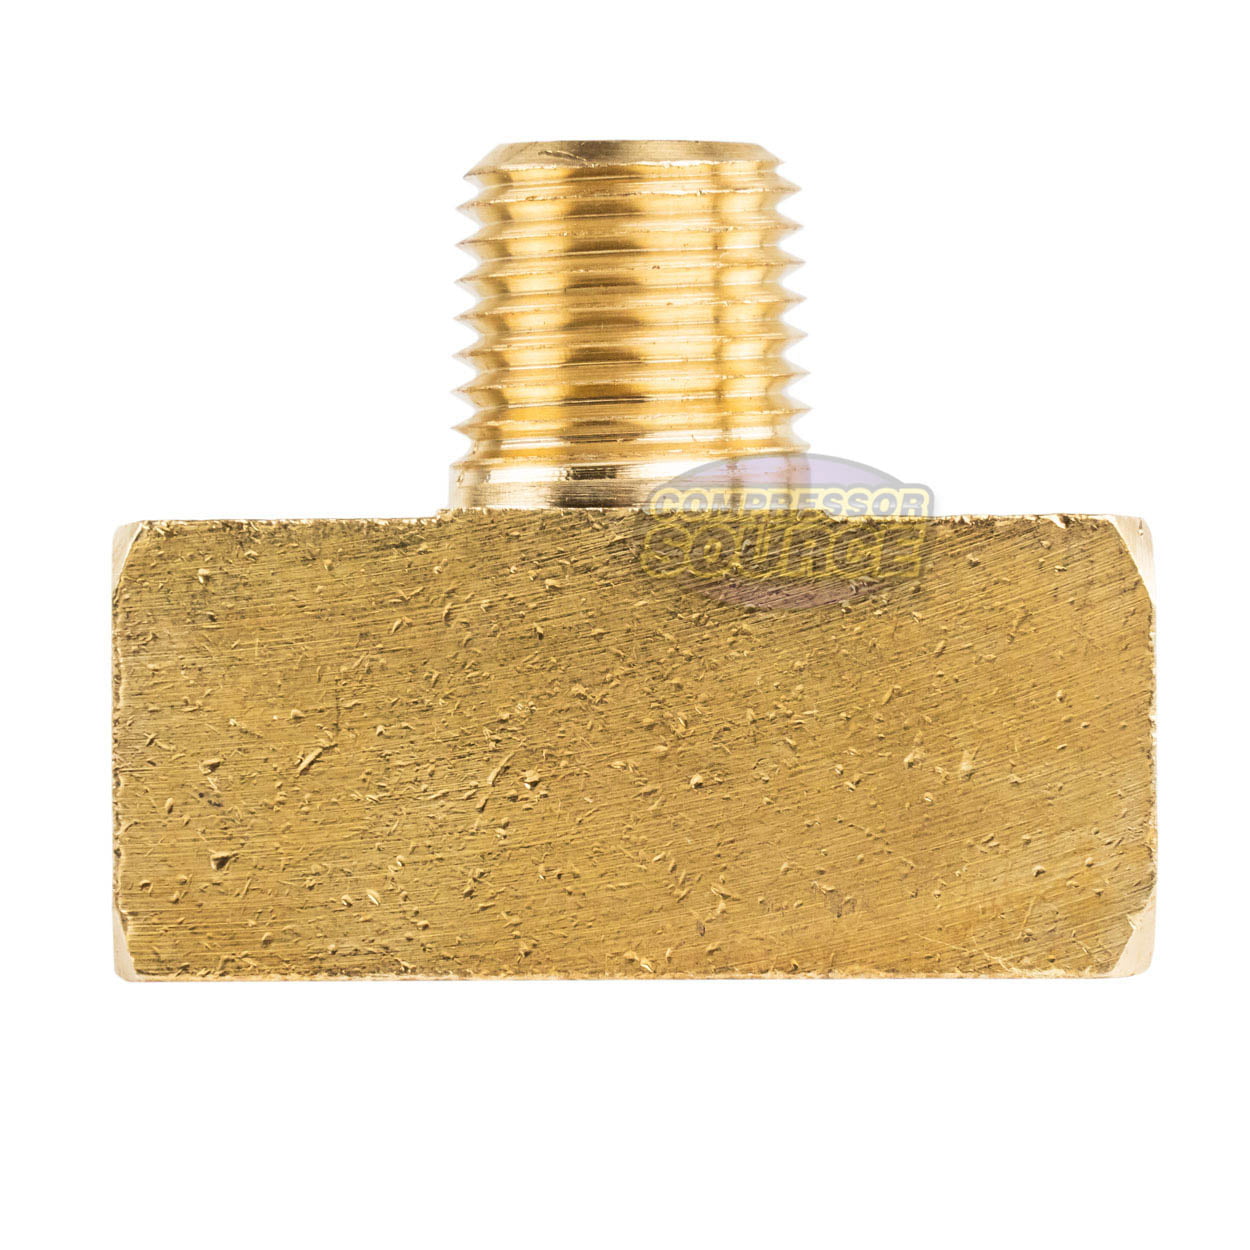 Male Branch Tee 1/4" Male NPT x 1/4" Female NPT Brass Union Tee Pipe Connector 